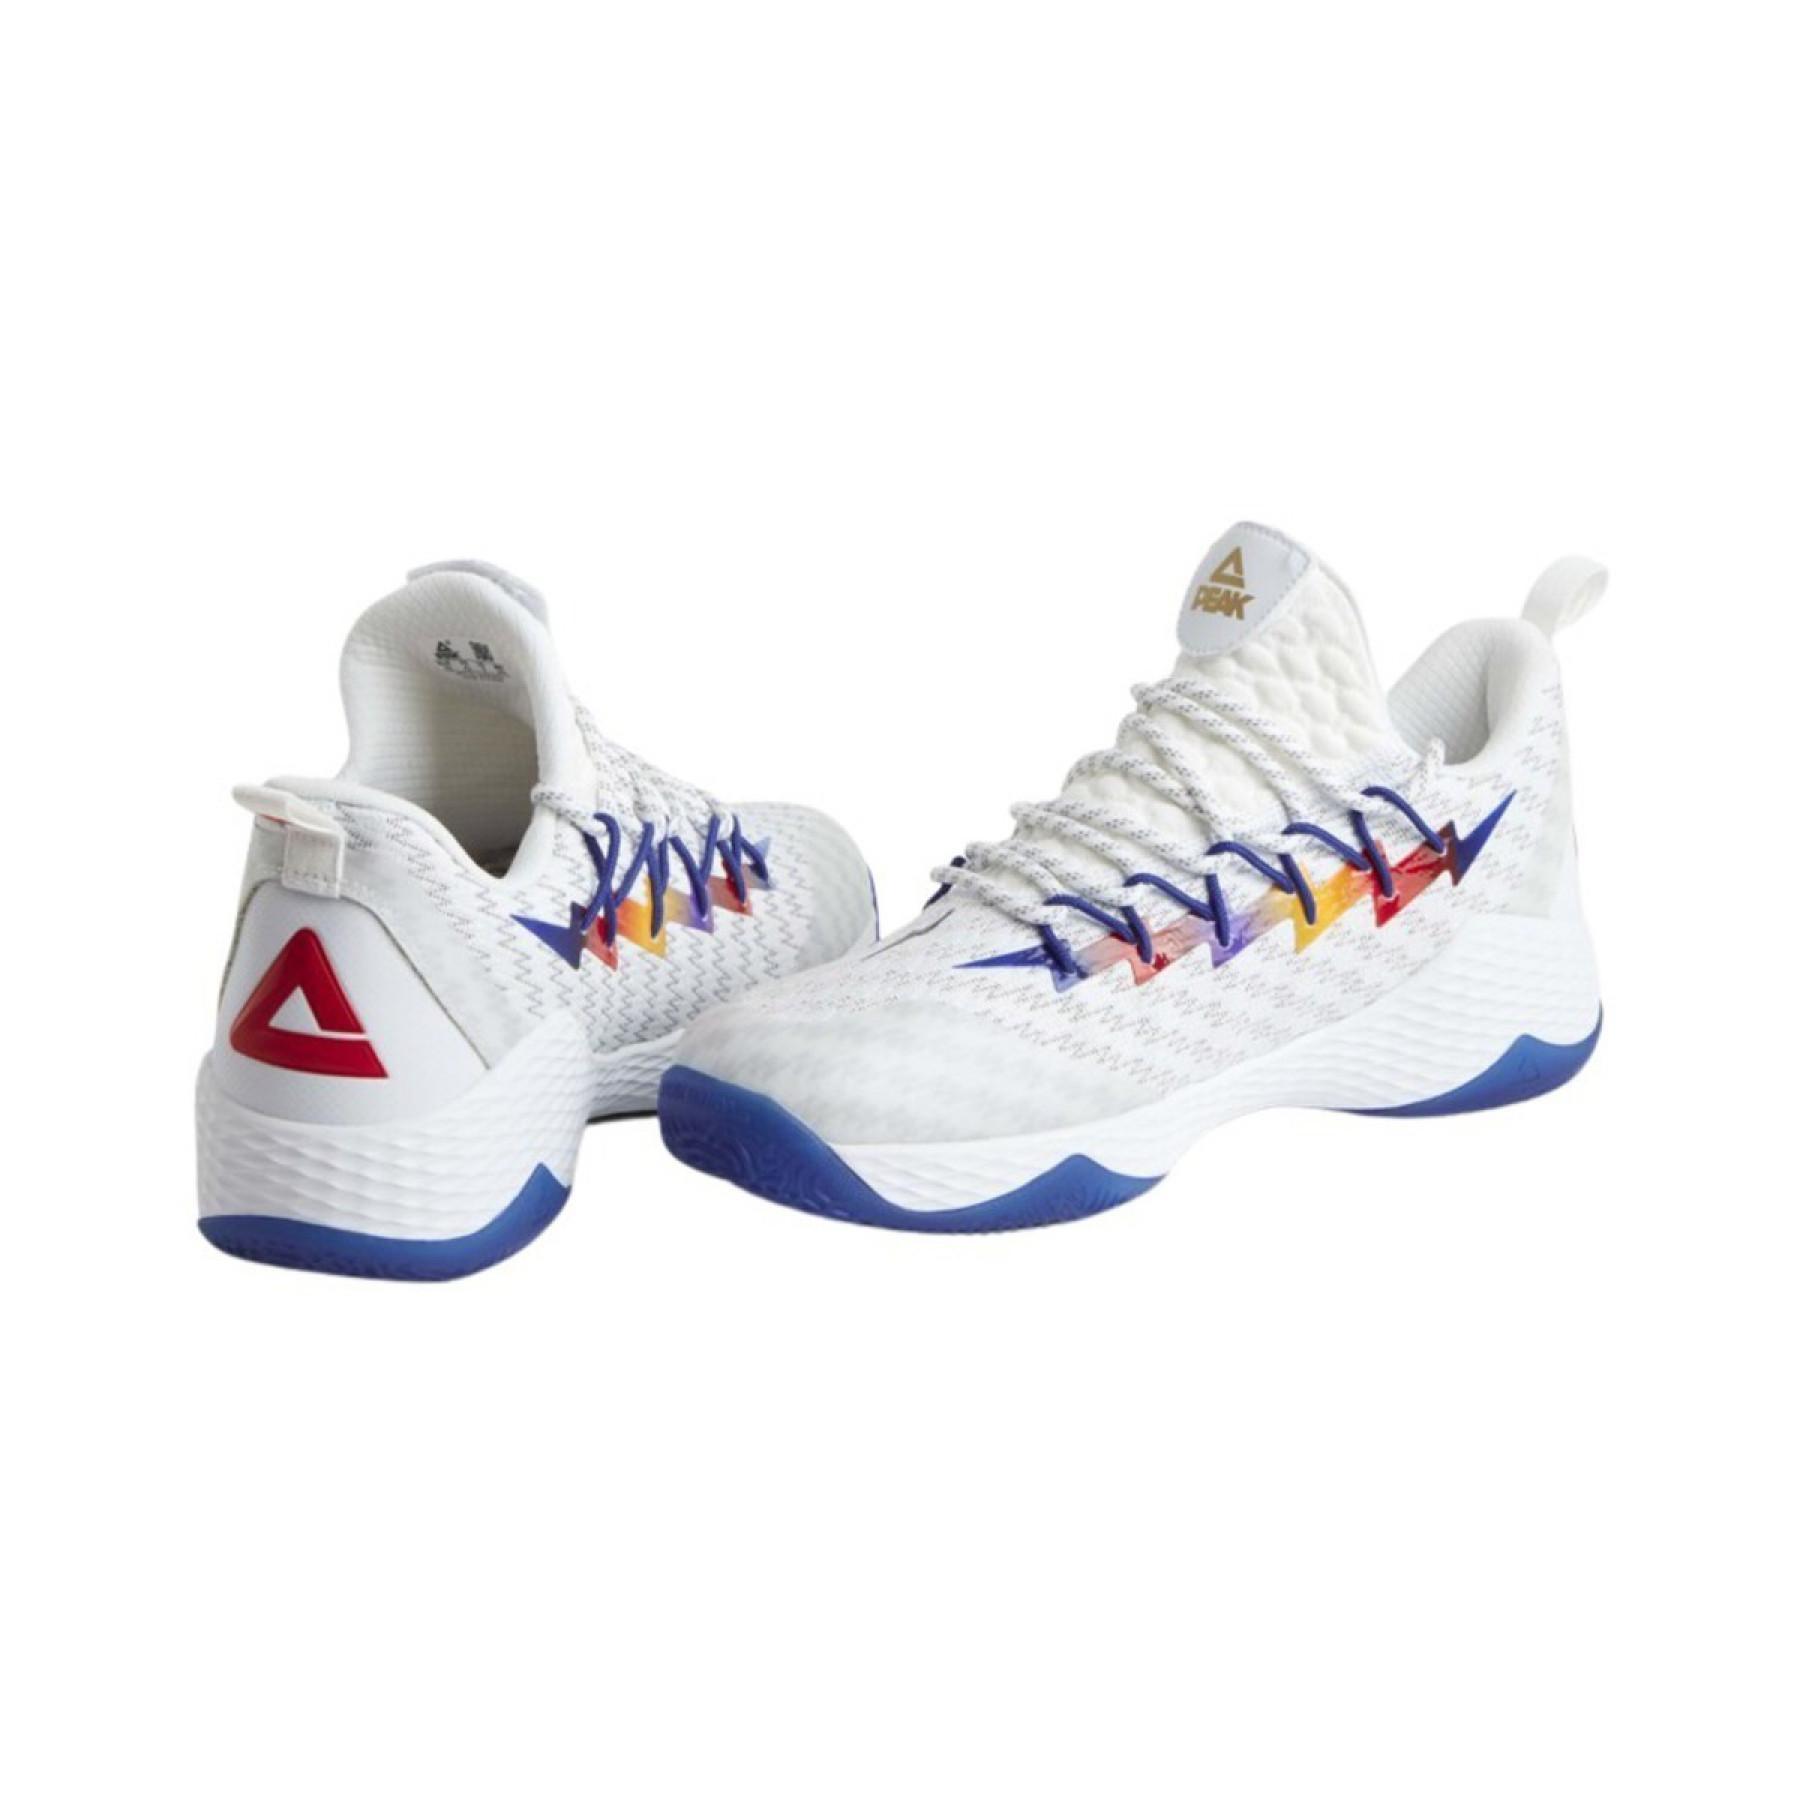 Indoor shoes Peak Lou Williams 2 édition 6th man - Peak - Other Brands ...